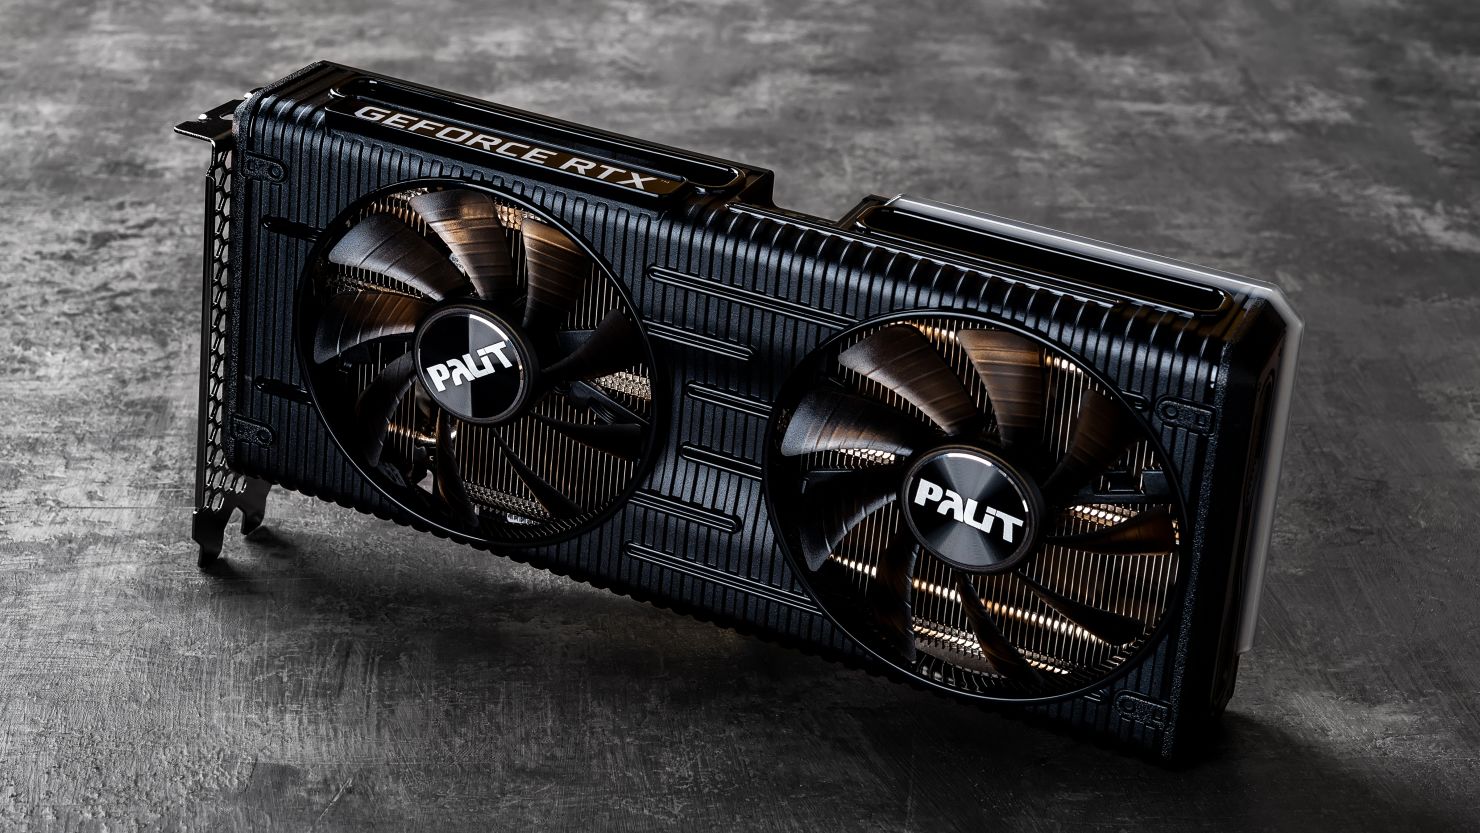 How to find the best price on graphics cards